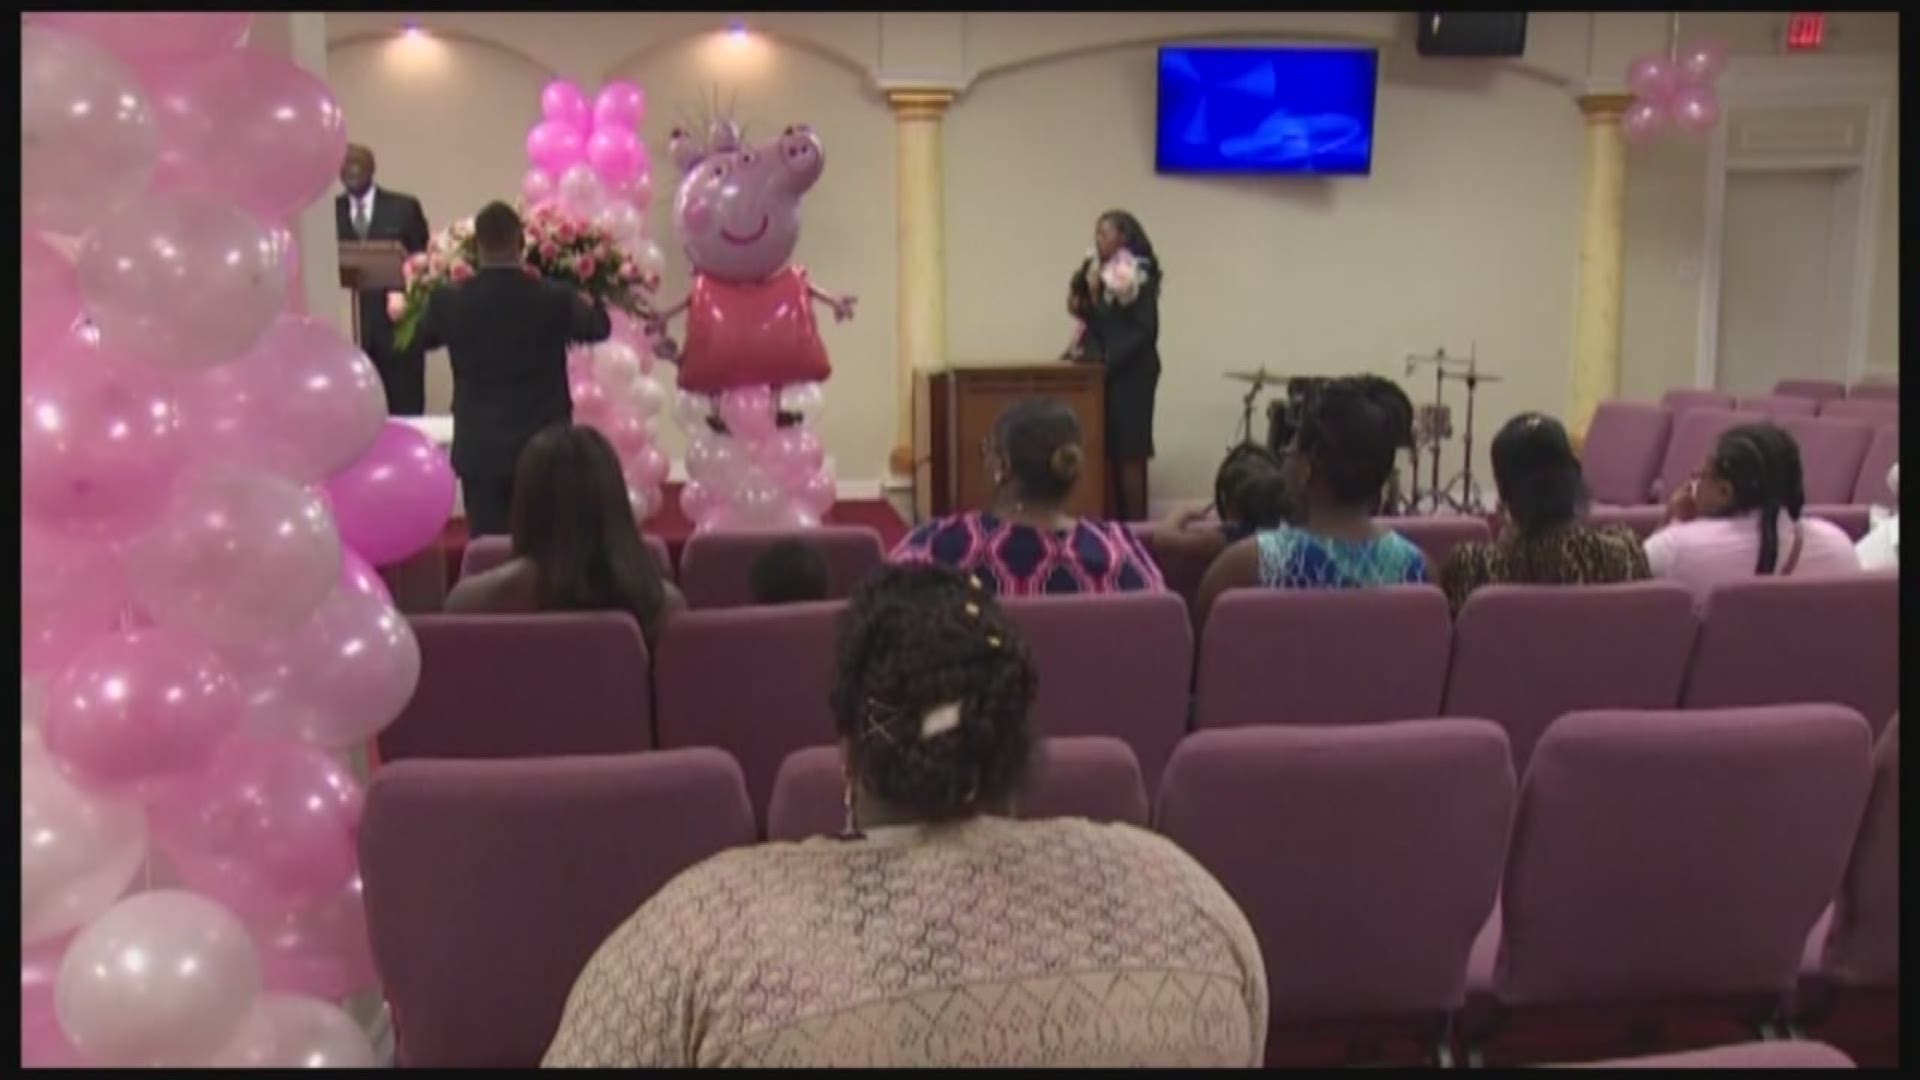 Hundreds gathered Saturday for the funeral of a 4-year-old girl whom investigators say was stabbed by her mother.